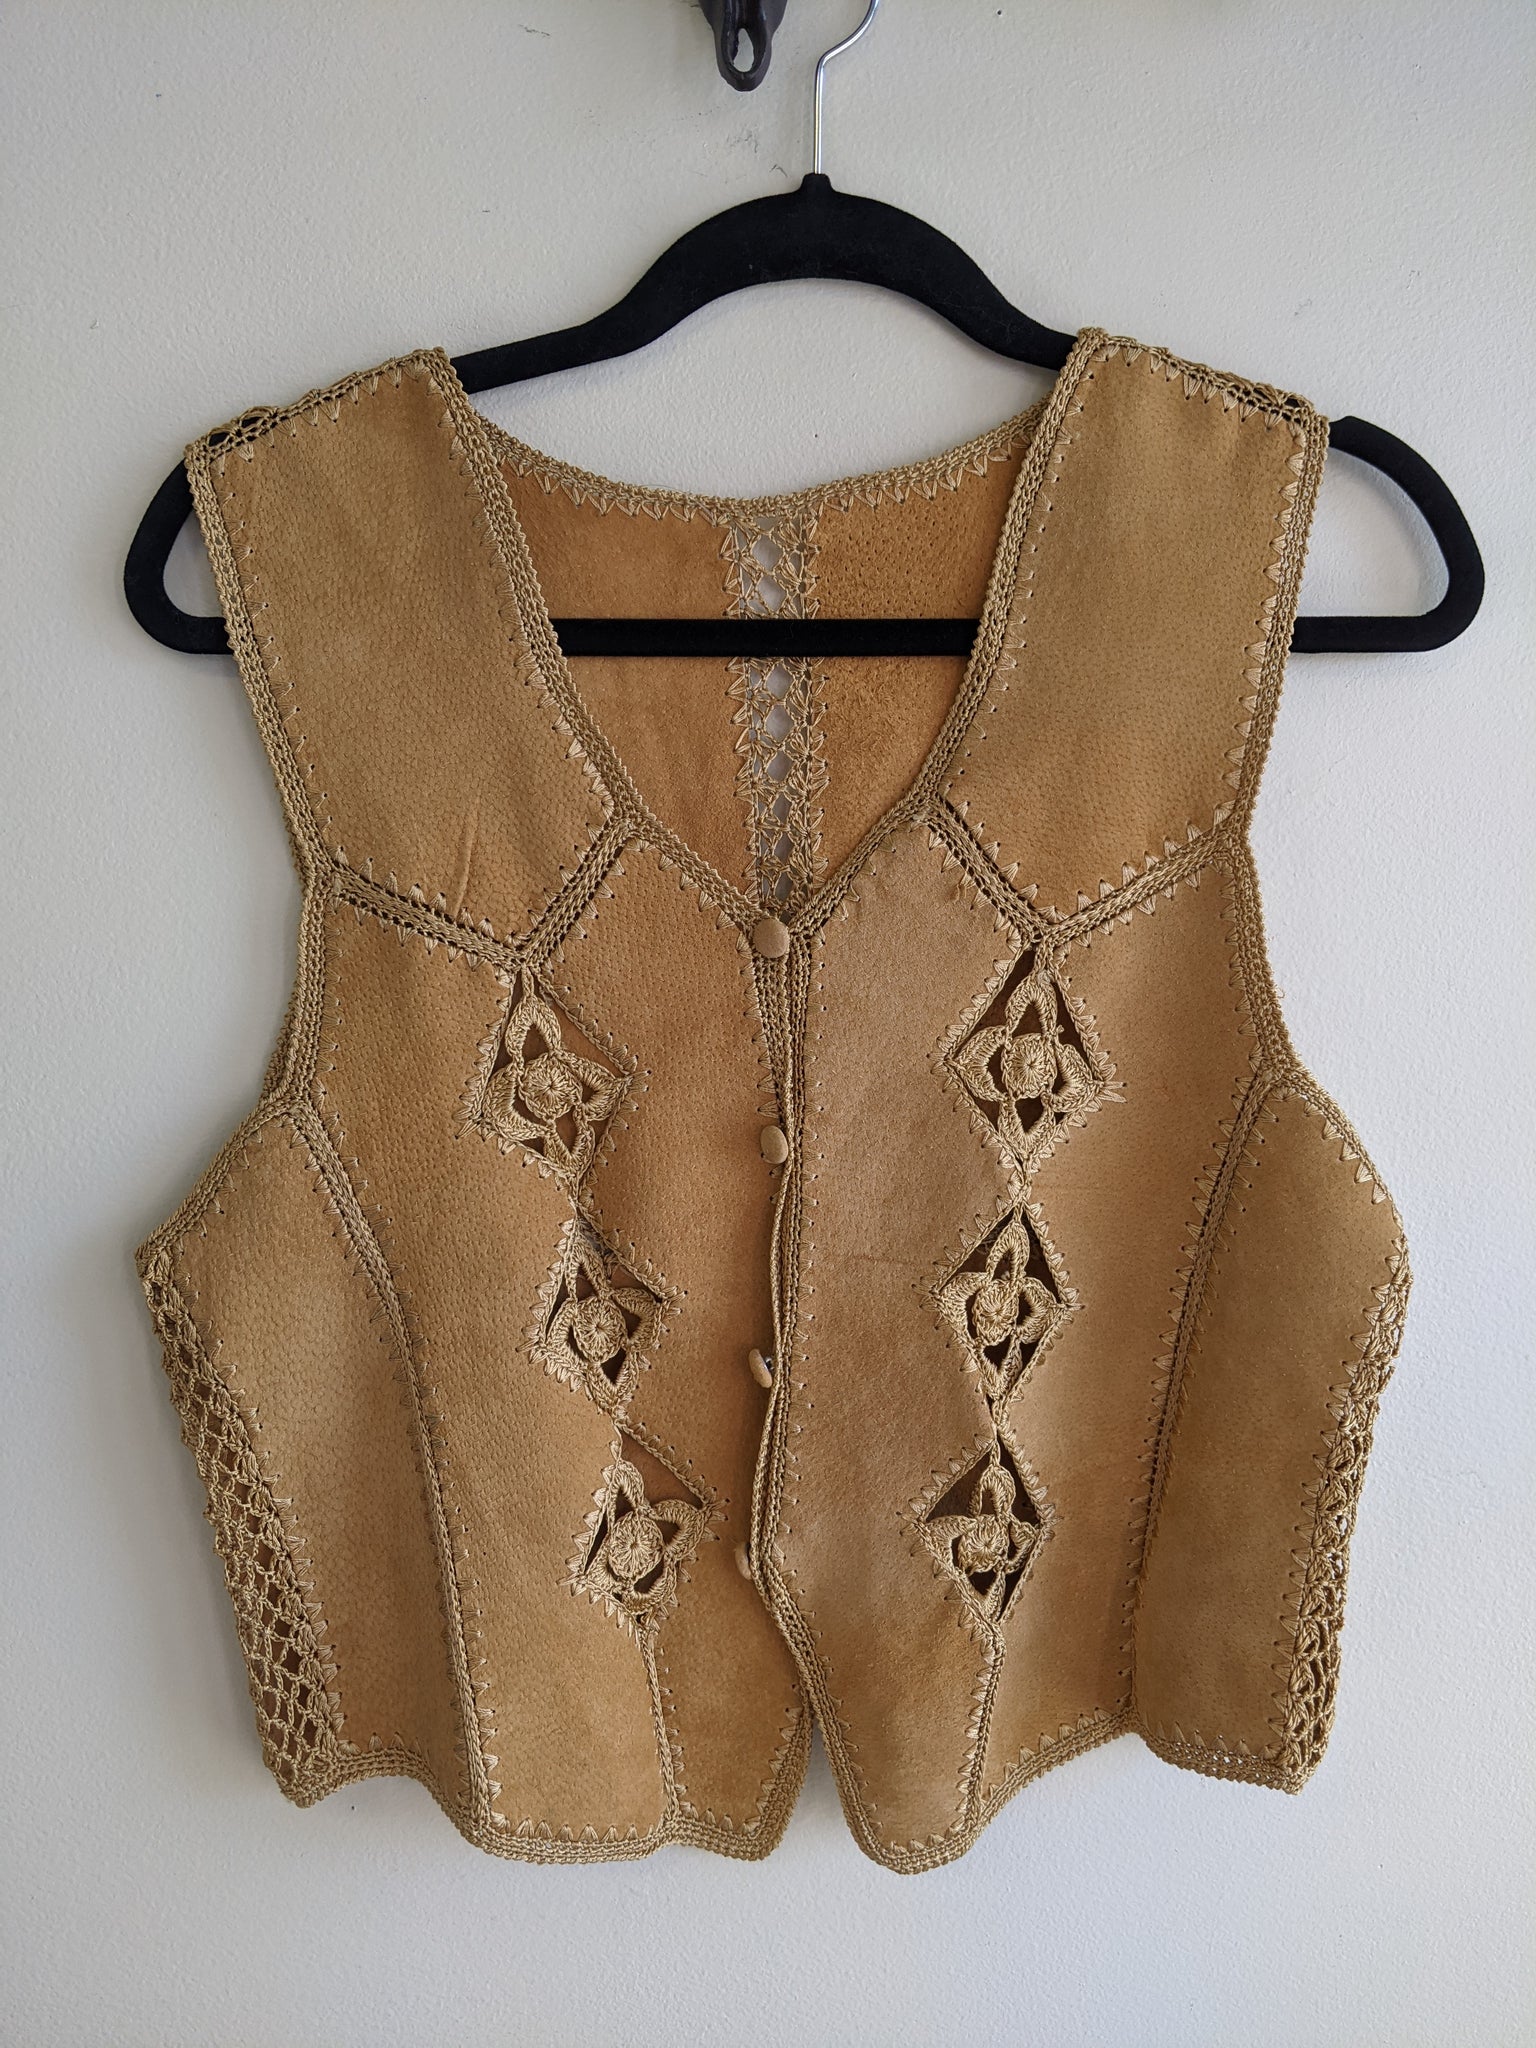 Leather and Lace Vest - M